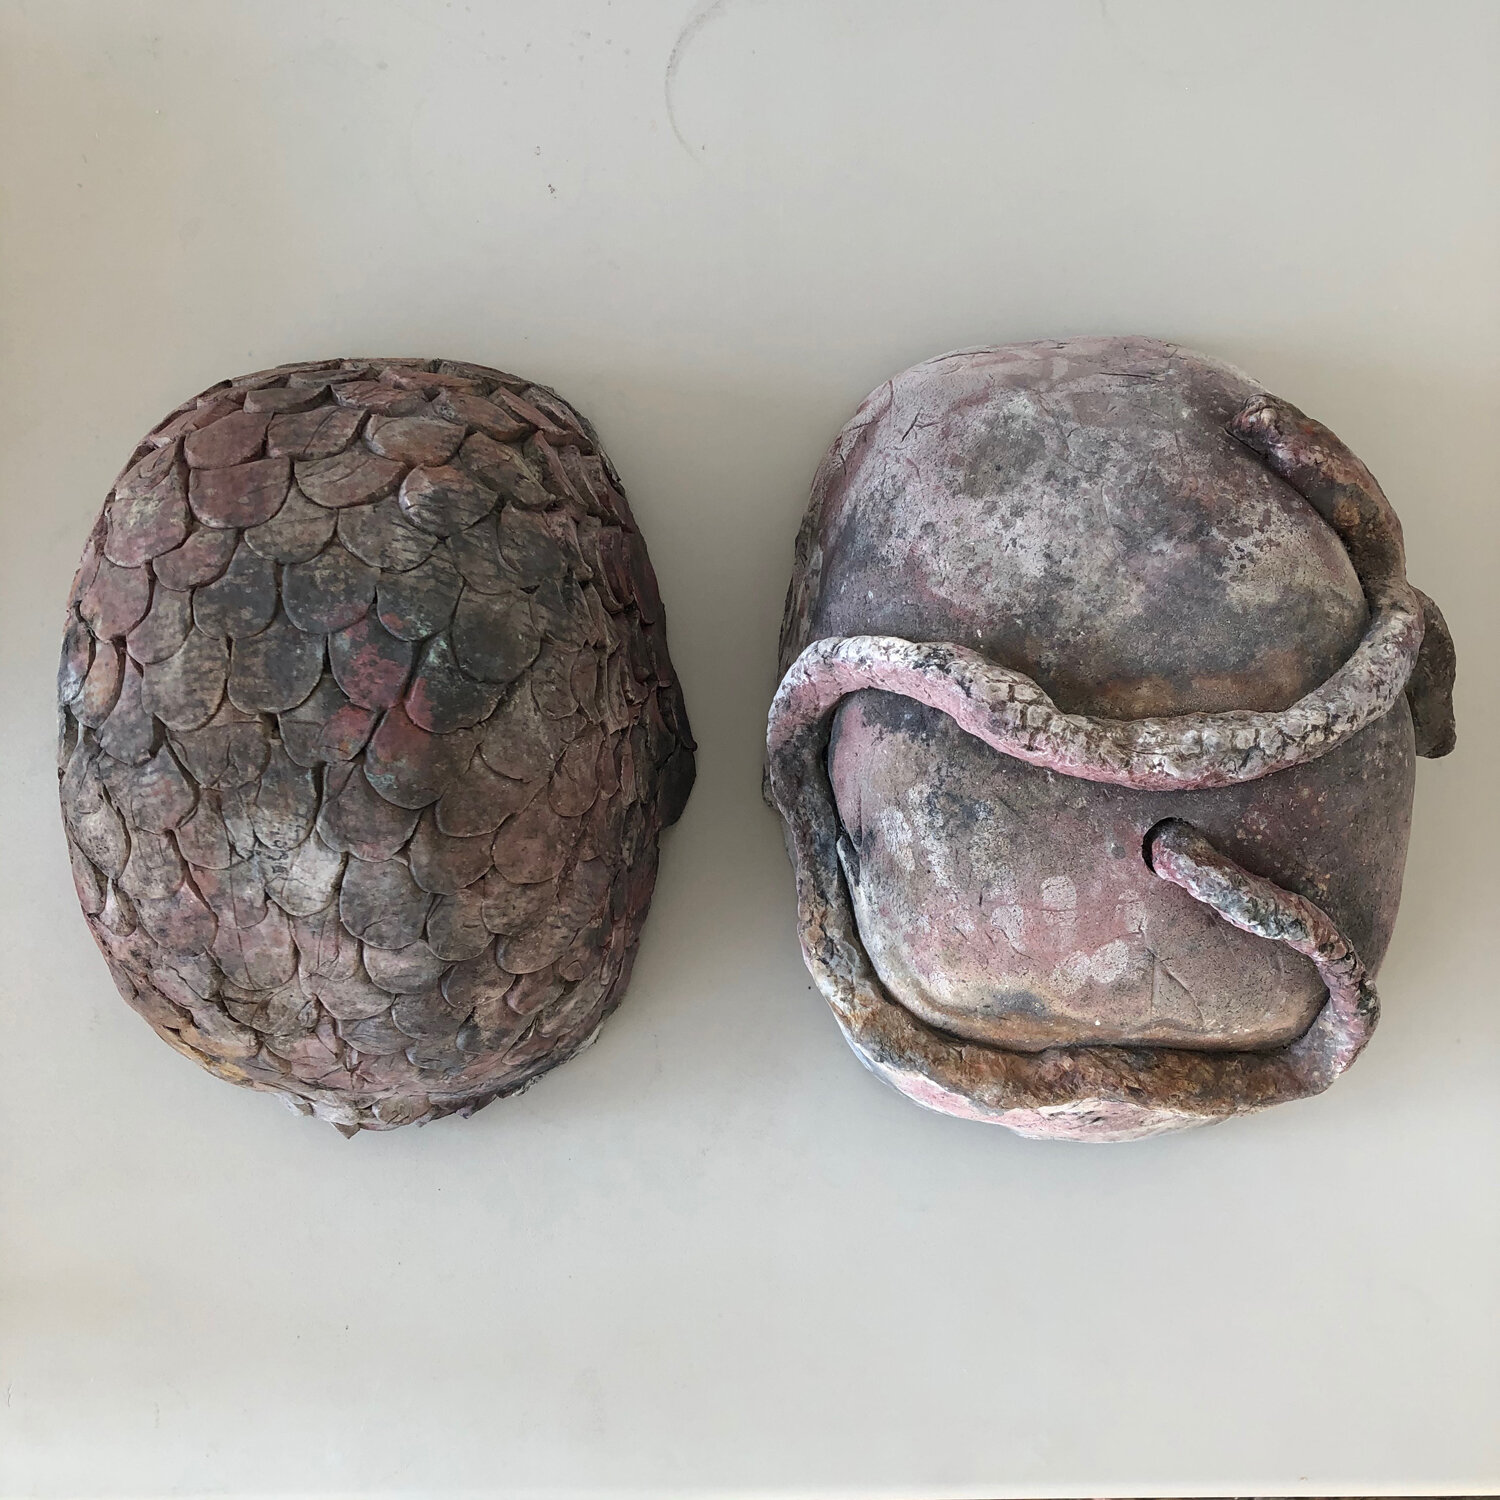 Two Bellies, 2019, pit fired ceramics, 13 x 9 x 6" (left) and 14 x 12 x 7" (right)